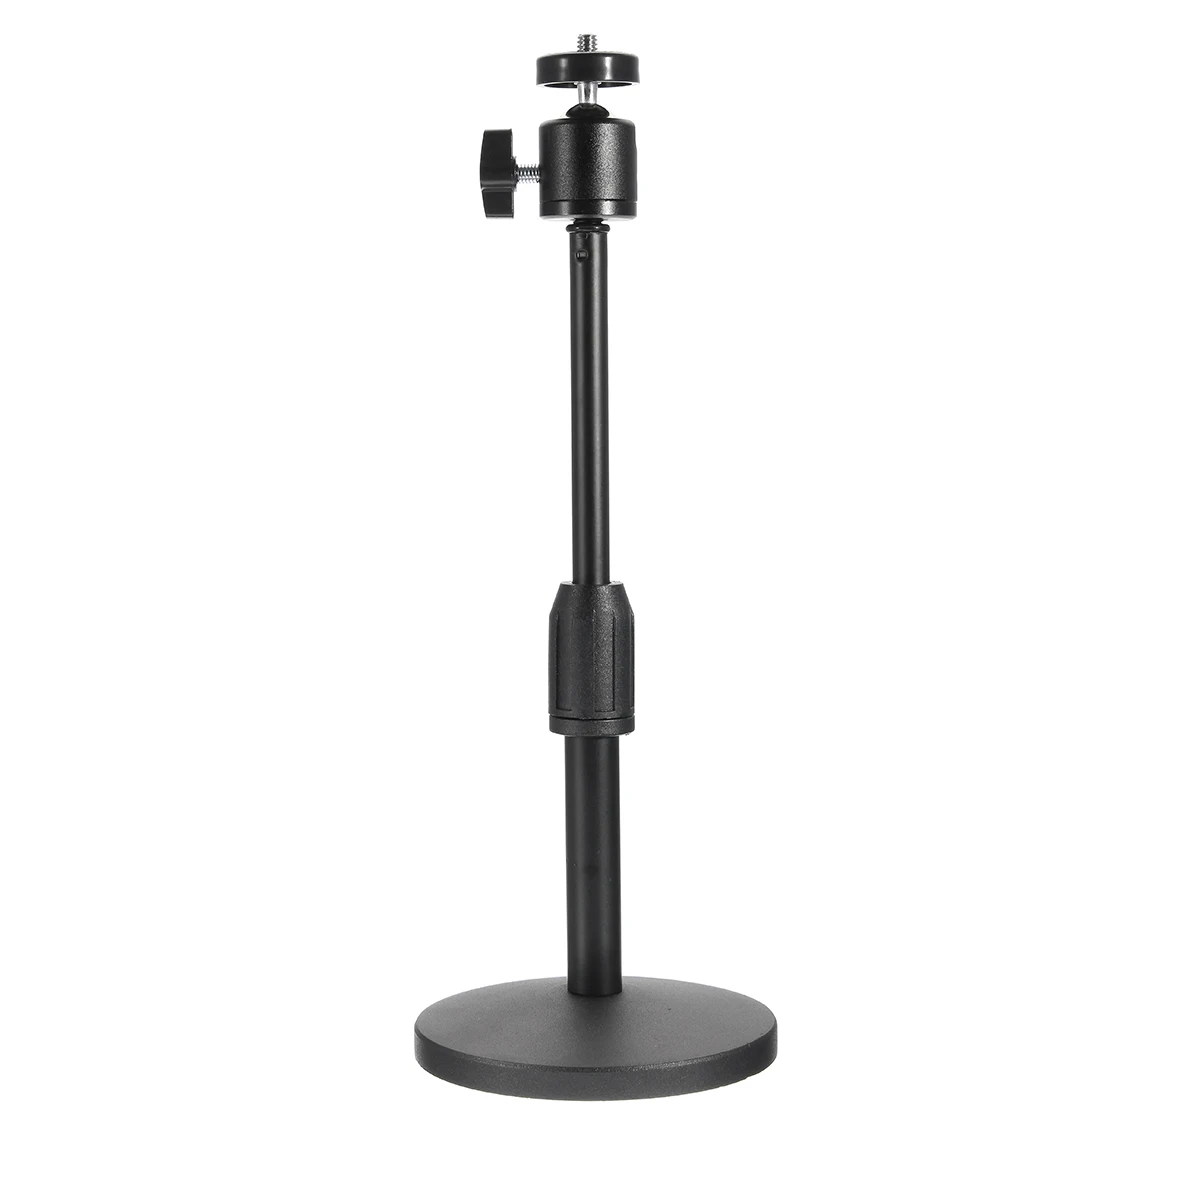 
Projector Mount Stand Adjustable Height Portable For Presentations Theatre US 